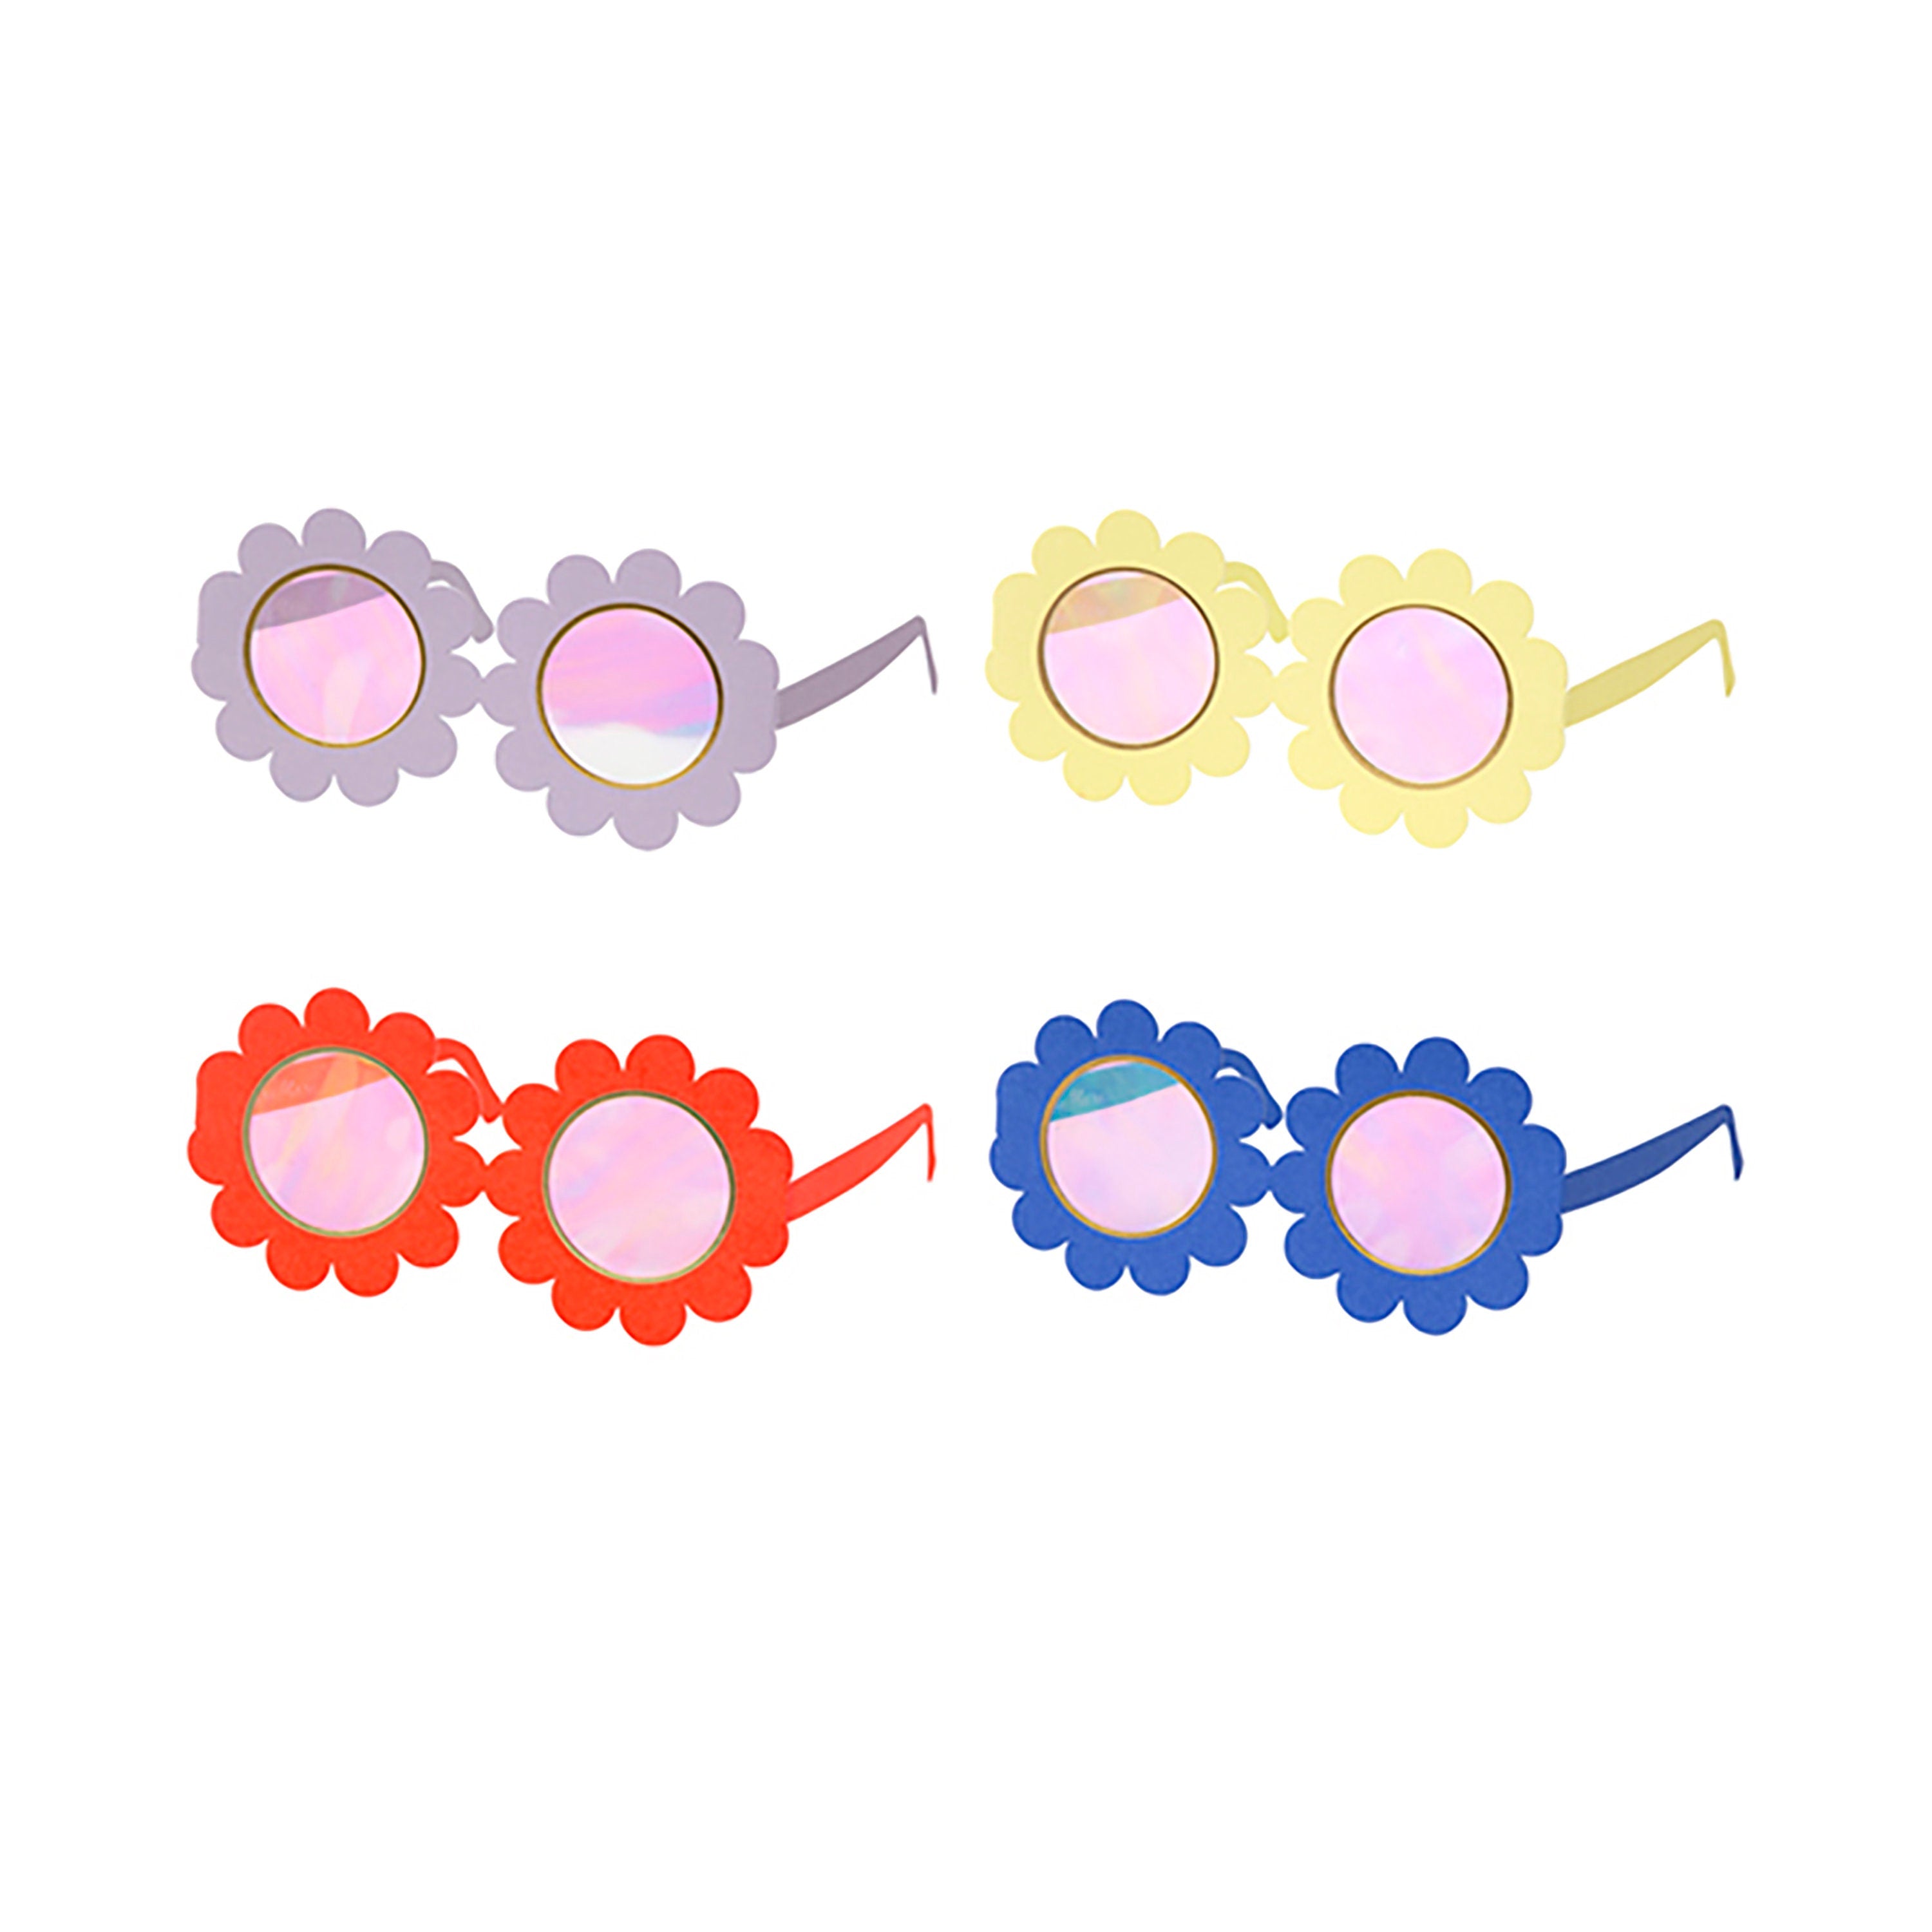 Party Glasses - Daisy Sunglasses | Flower Glasses - Party Sunglasses - Daisy Glasses - 60s Themed Party - Retro Party Theme - 70s Party